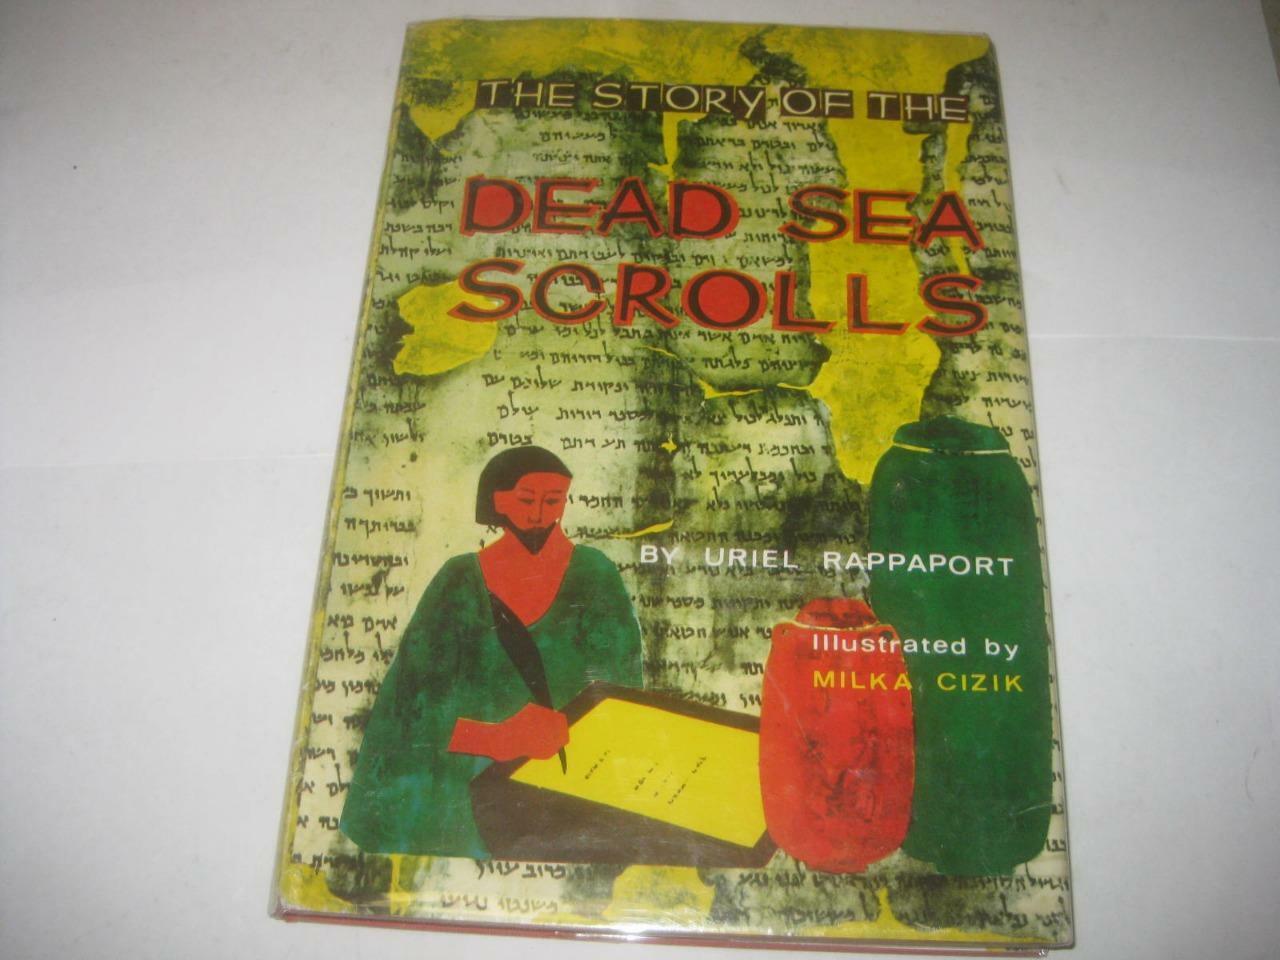 The Story of the Dead Sea Scrolls by Uriel Rappaport